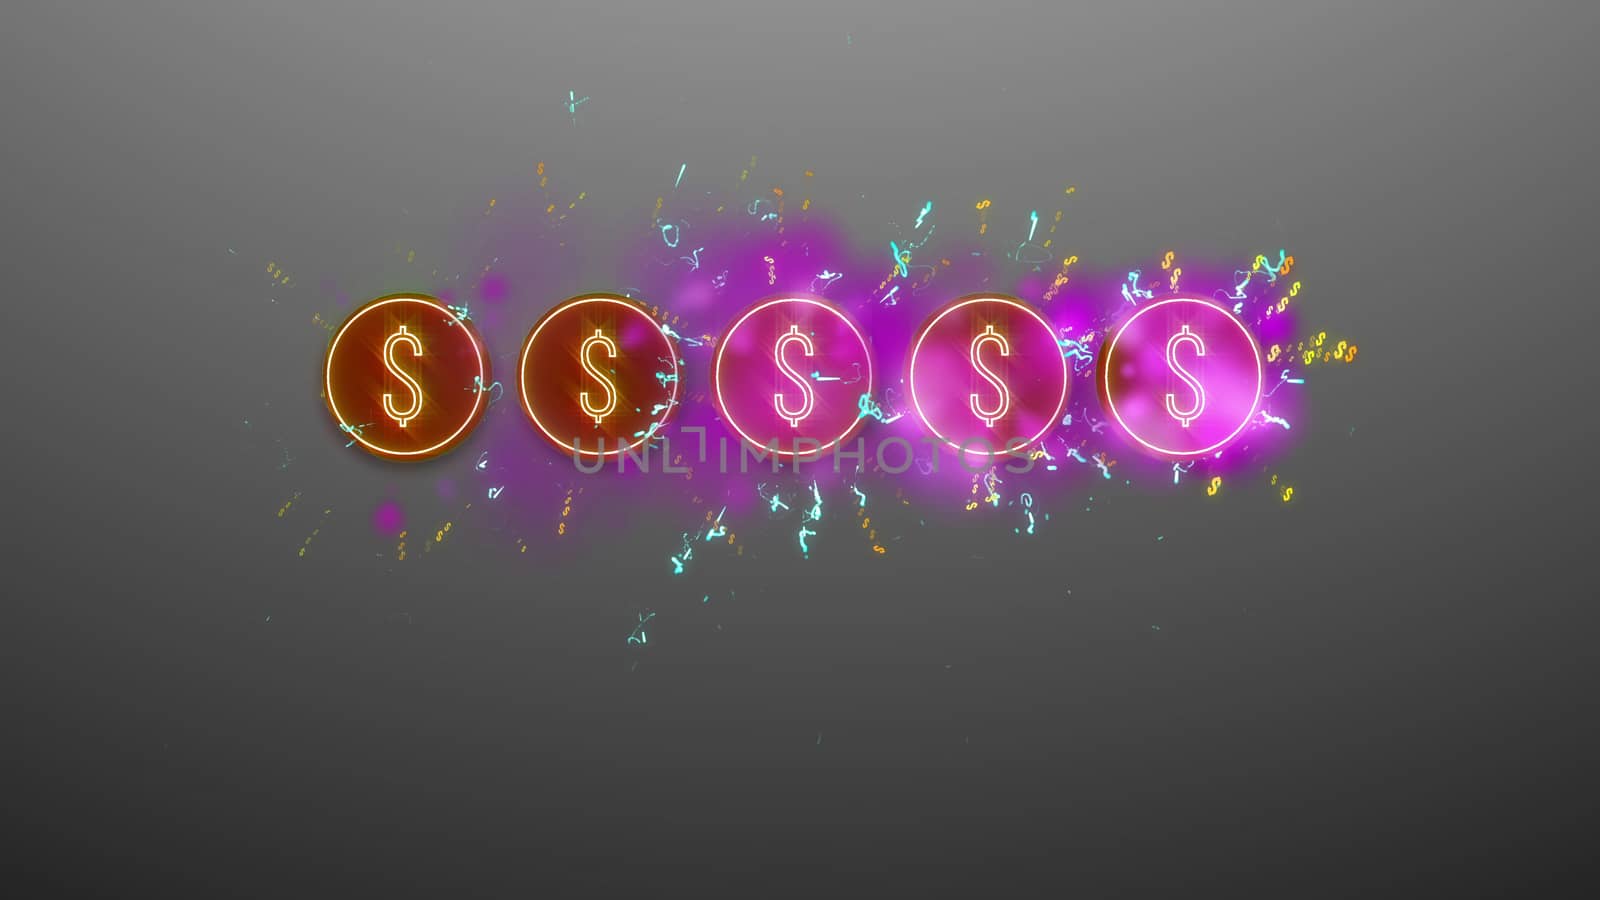 Hilarious 3d rendering of five brown and violet dollar signs placed in a row in the gray background with sparkling white and blue dots and lines.  The business rating is high, and dererves respect